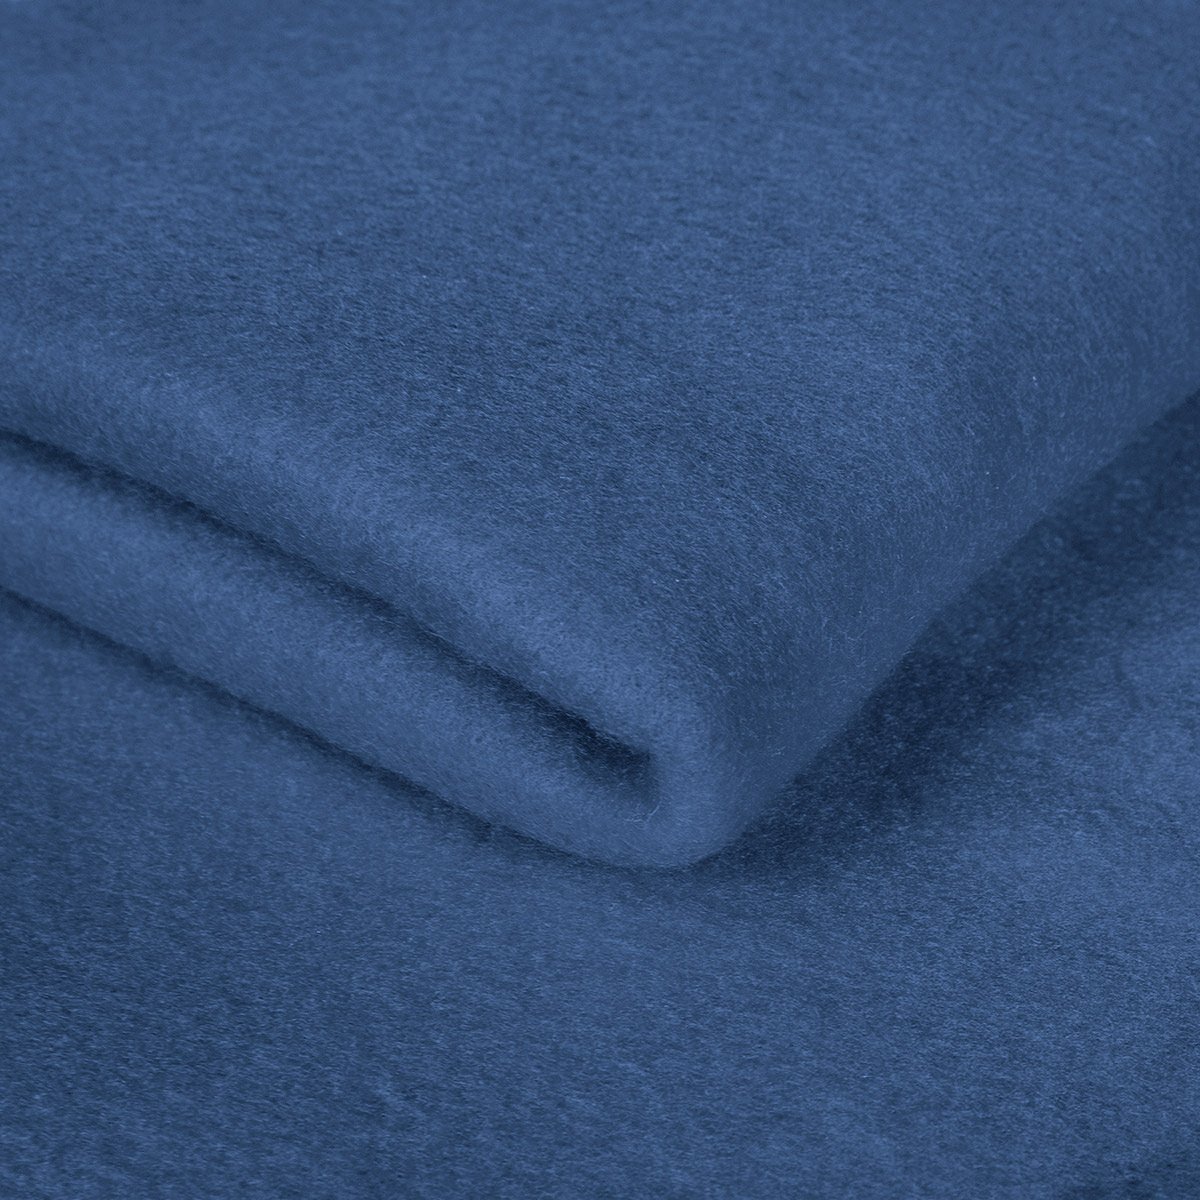 Plain / Solids Polyester Bonded Polar Fleece Fabric, Blue at Rs